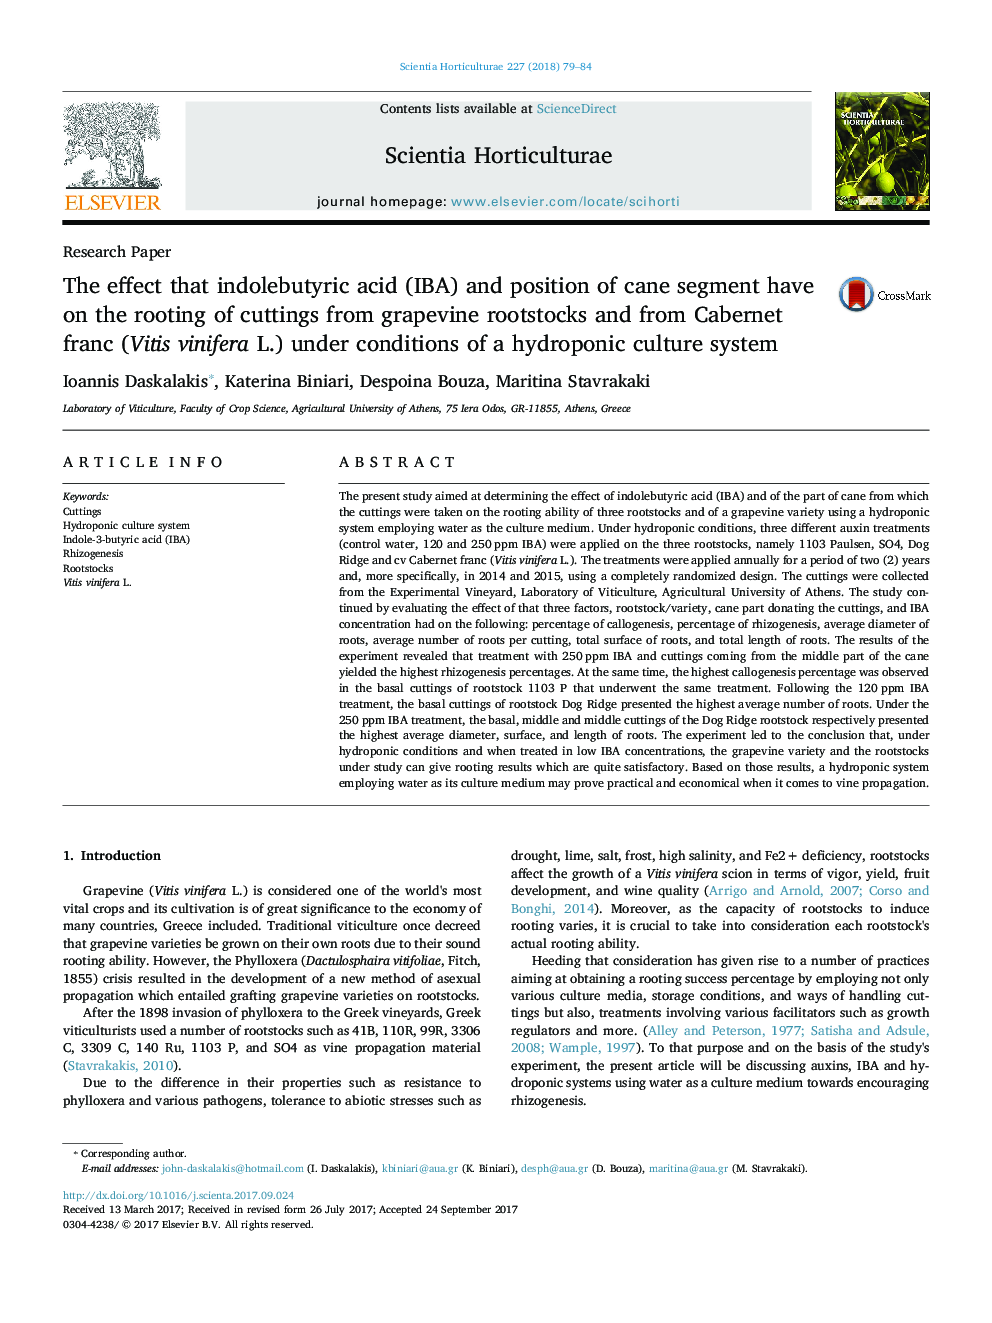 The effect that indolebutyric acid (IBA) and position of cane segment have on the rooting of cuttings from grapevine rootstocks and from Cabernet franc (Vitis vinifera L.) under conditions of a hydroponic culture system